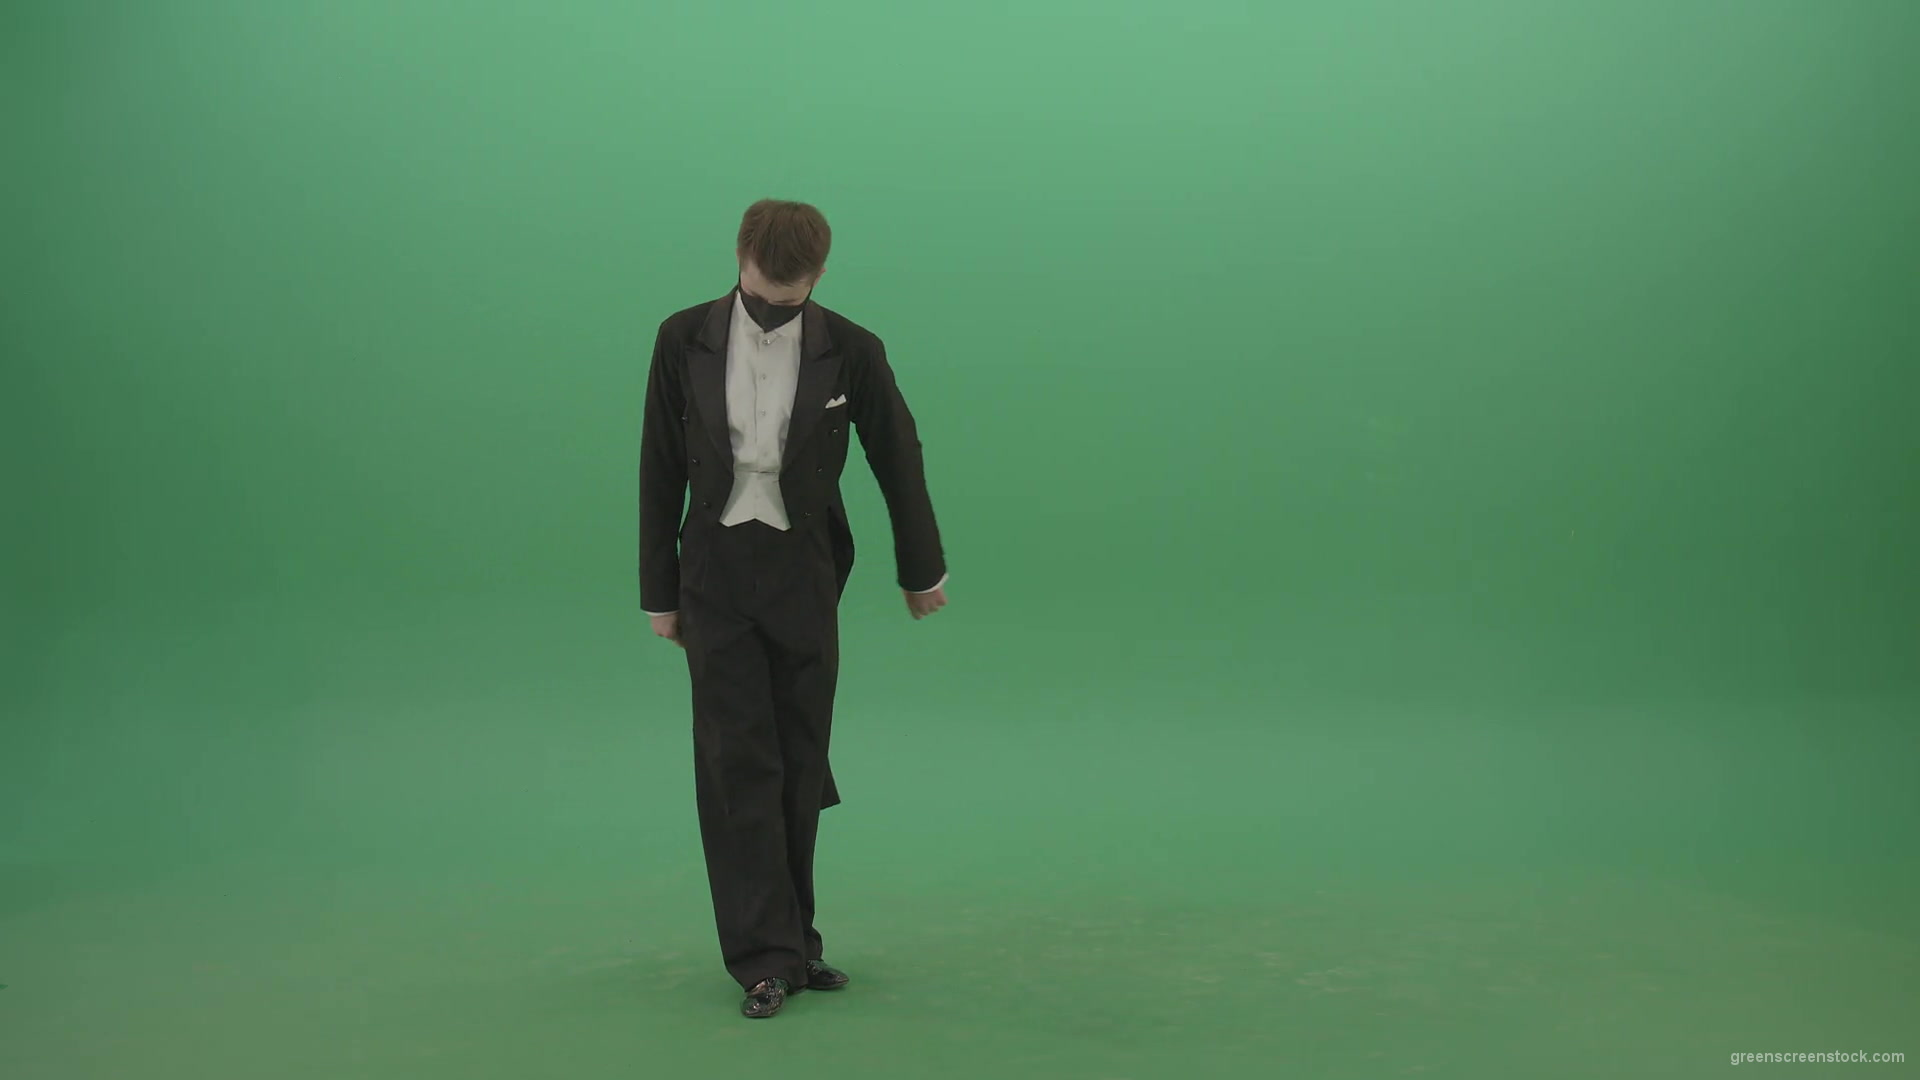 Man-in-Classical-ballroom-suite-making-wish-regards-to-impres-audience-in-black-medicine-mask-on-green-screen-4K-Video-Footage-1920_005 Green Screen Stock